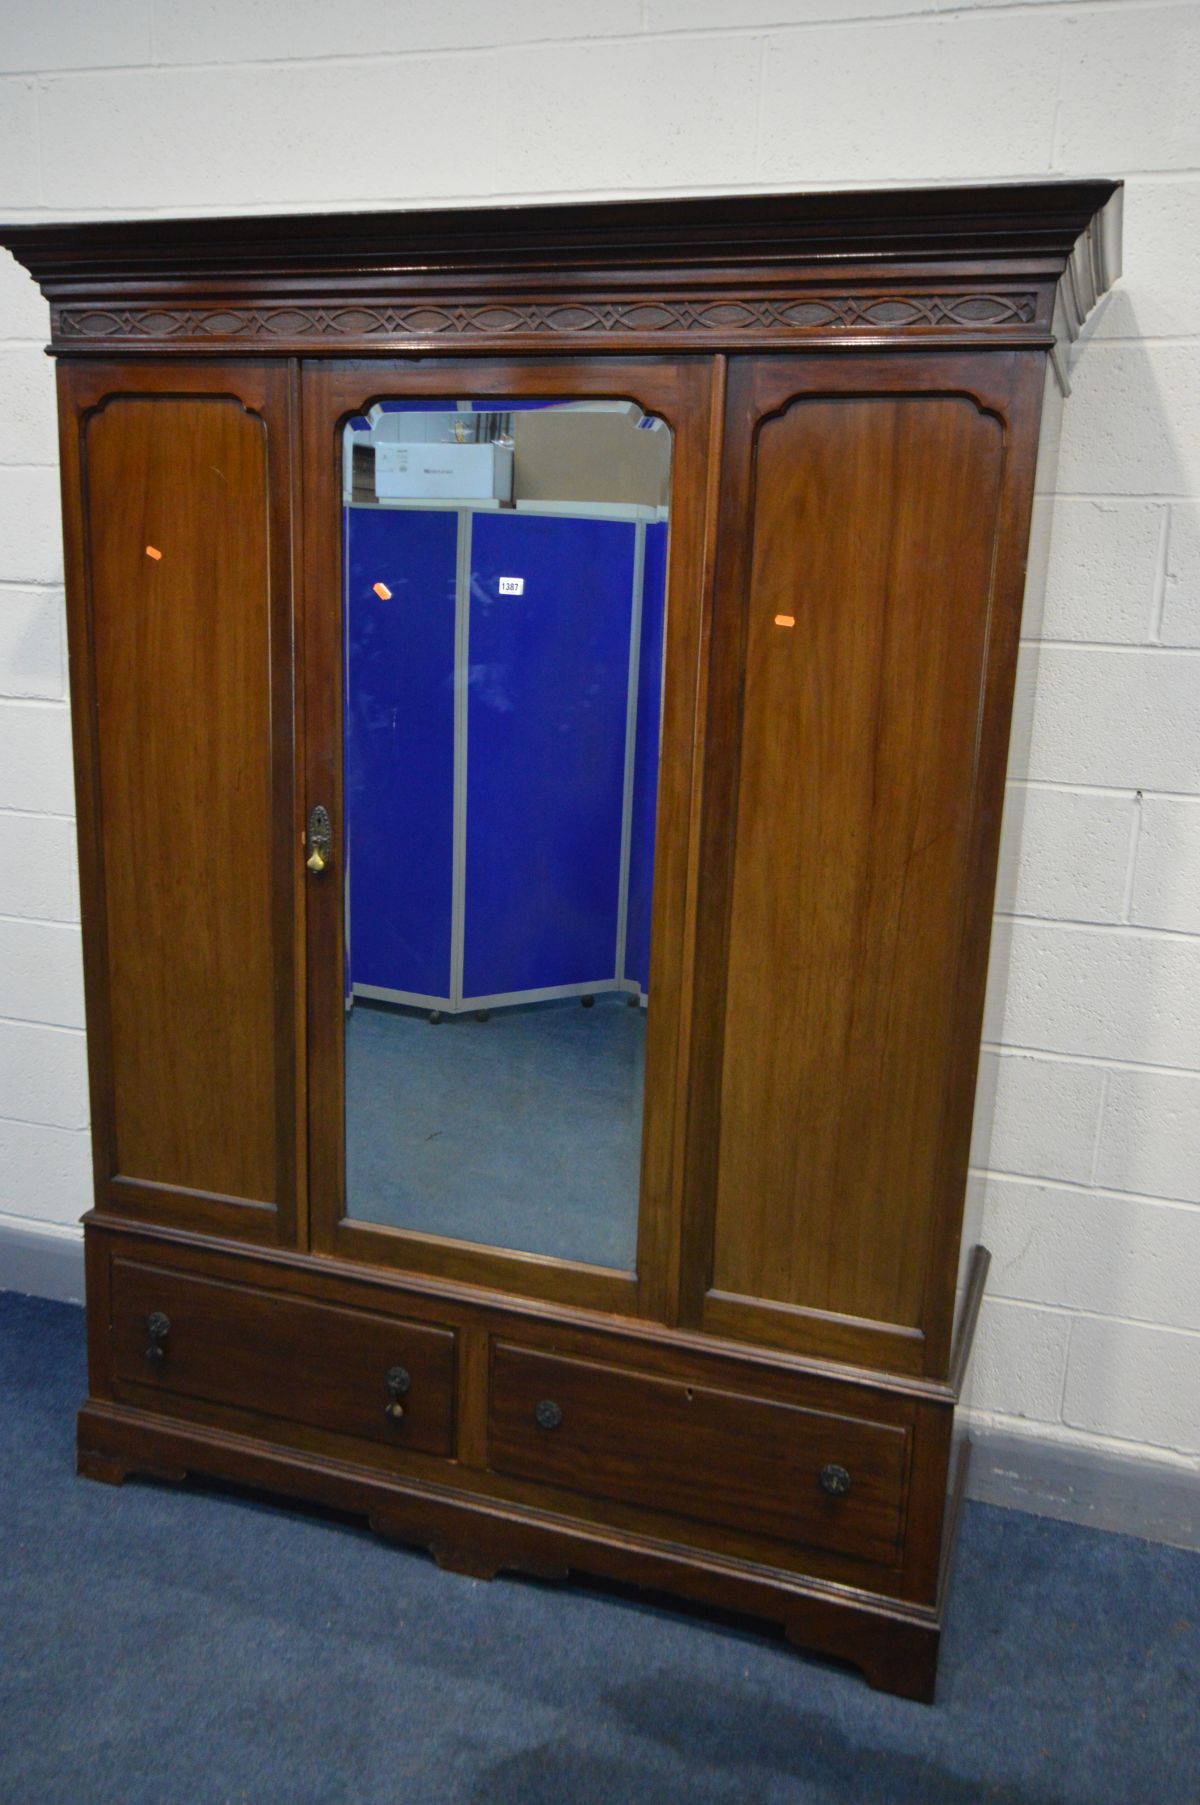 AN EDWARDIAN MAHOGANY MIRRORED SINGLE DOOR WARDROBE, the cornice with blind fretwork, above two